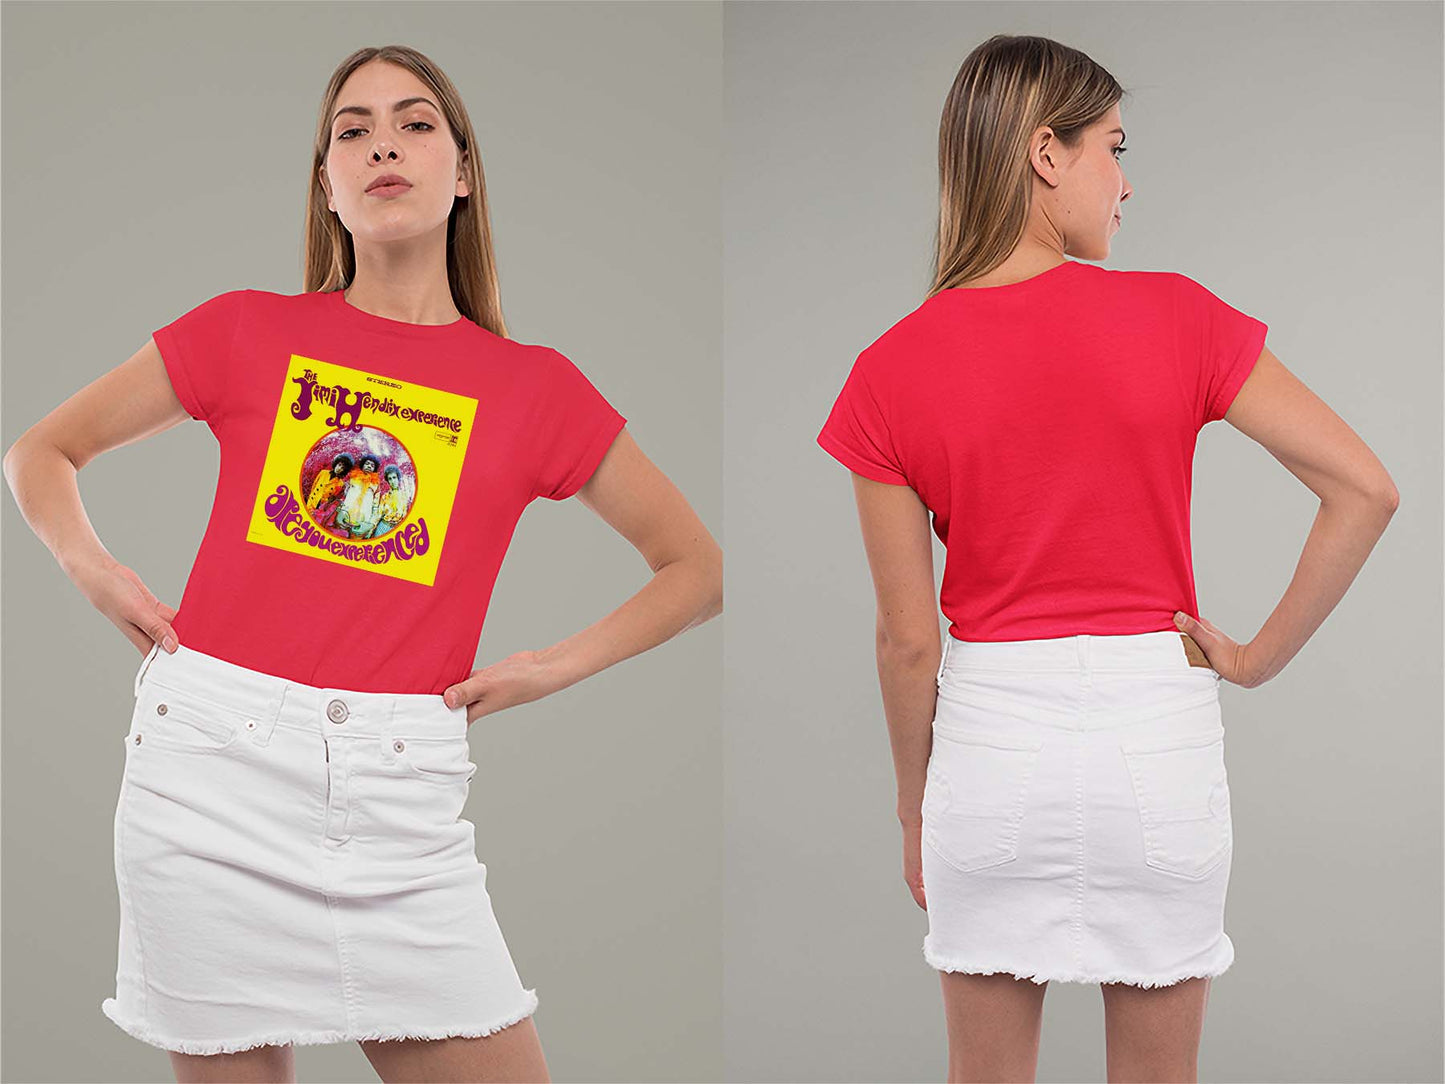 Are You Experienced Ladies Crew (Round) Neck Shirt Small Red